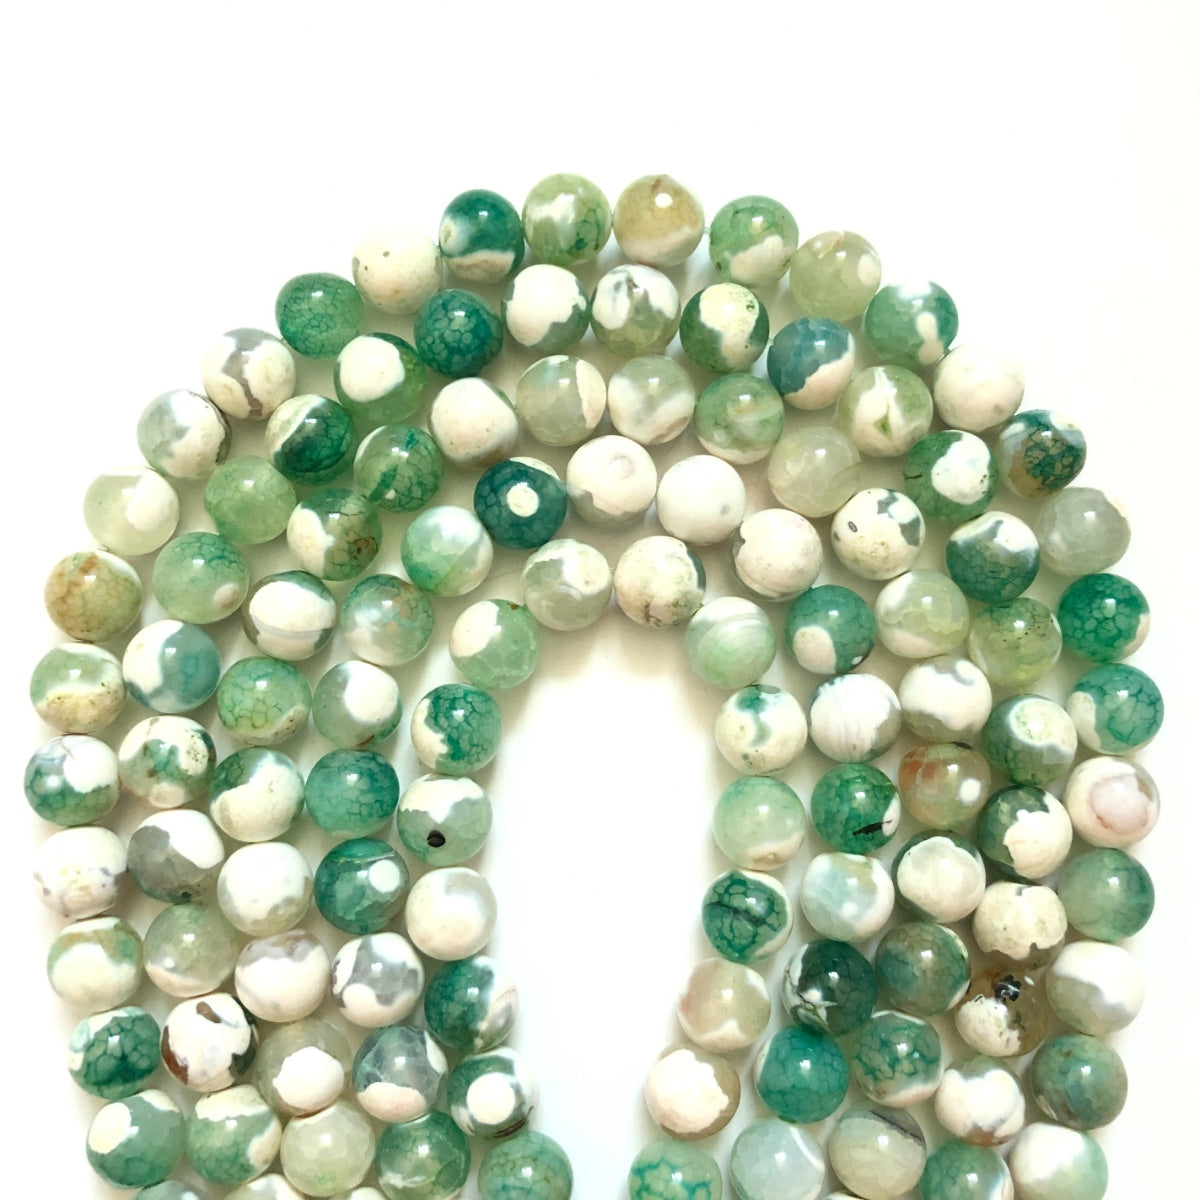 2 Strands/lot 10mm Green Round Fire Agate Stone Beads Stone Beads New Beads Arrivals Round Agate Beads Charms Beads Beyond